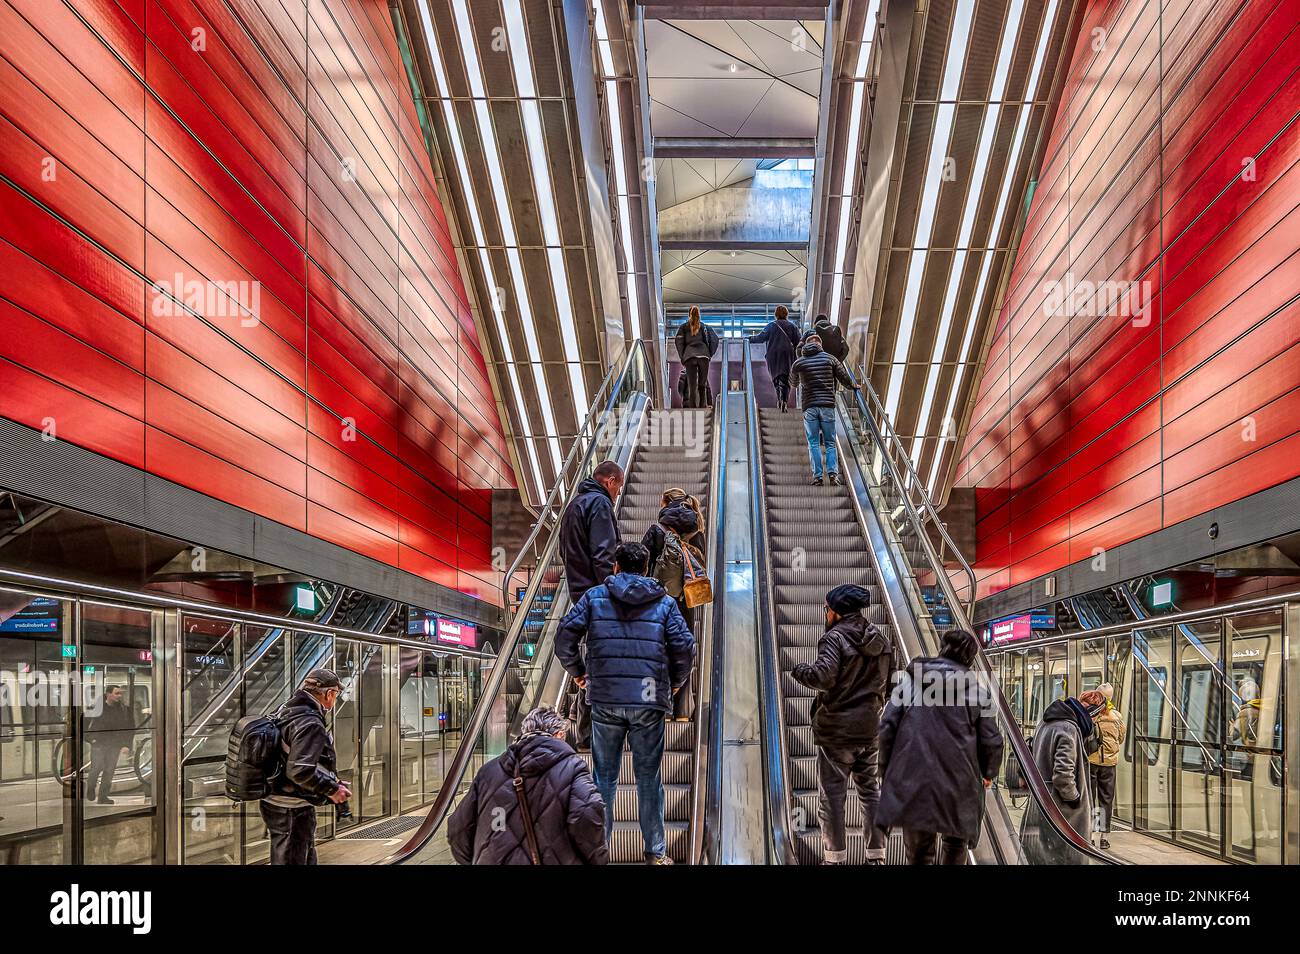 Escalators at the metro station of the City Circle Line at Nørrebro Station in Copenhagen, Februsry 18, 2023 Stock Photo